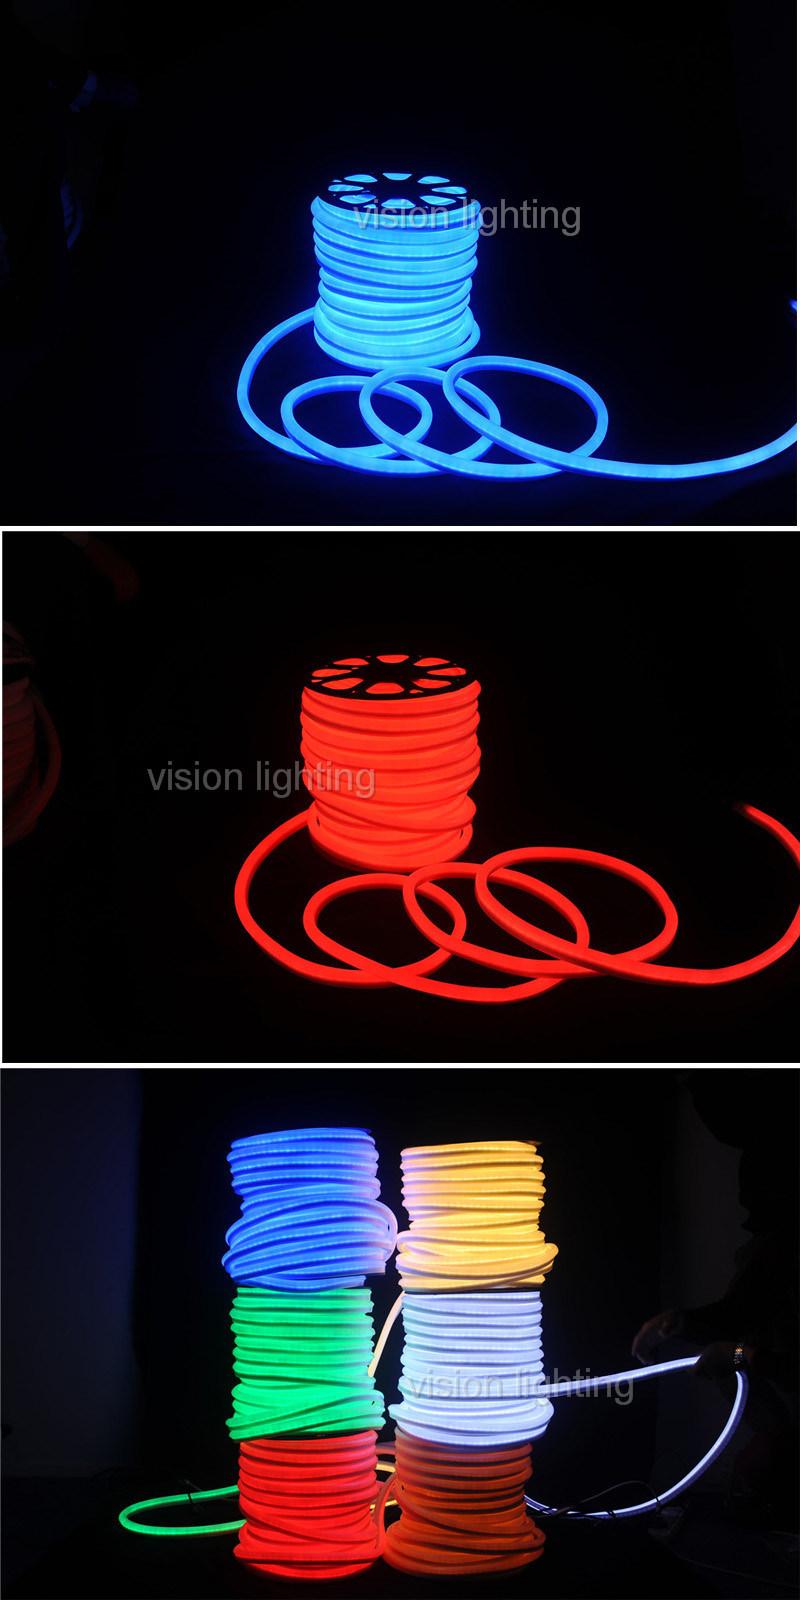 Manufacturers Wholesale LED Neon Lights